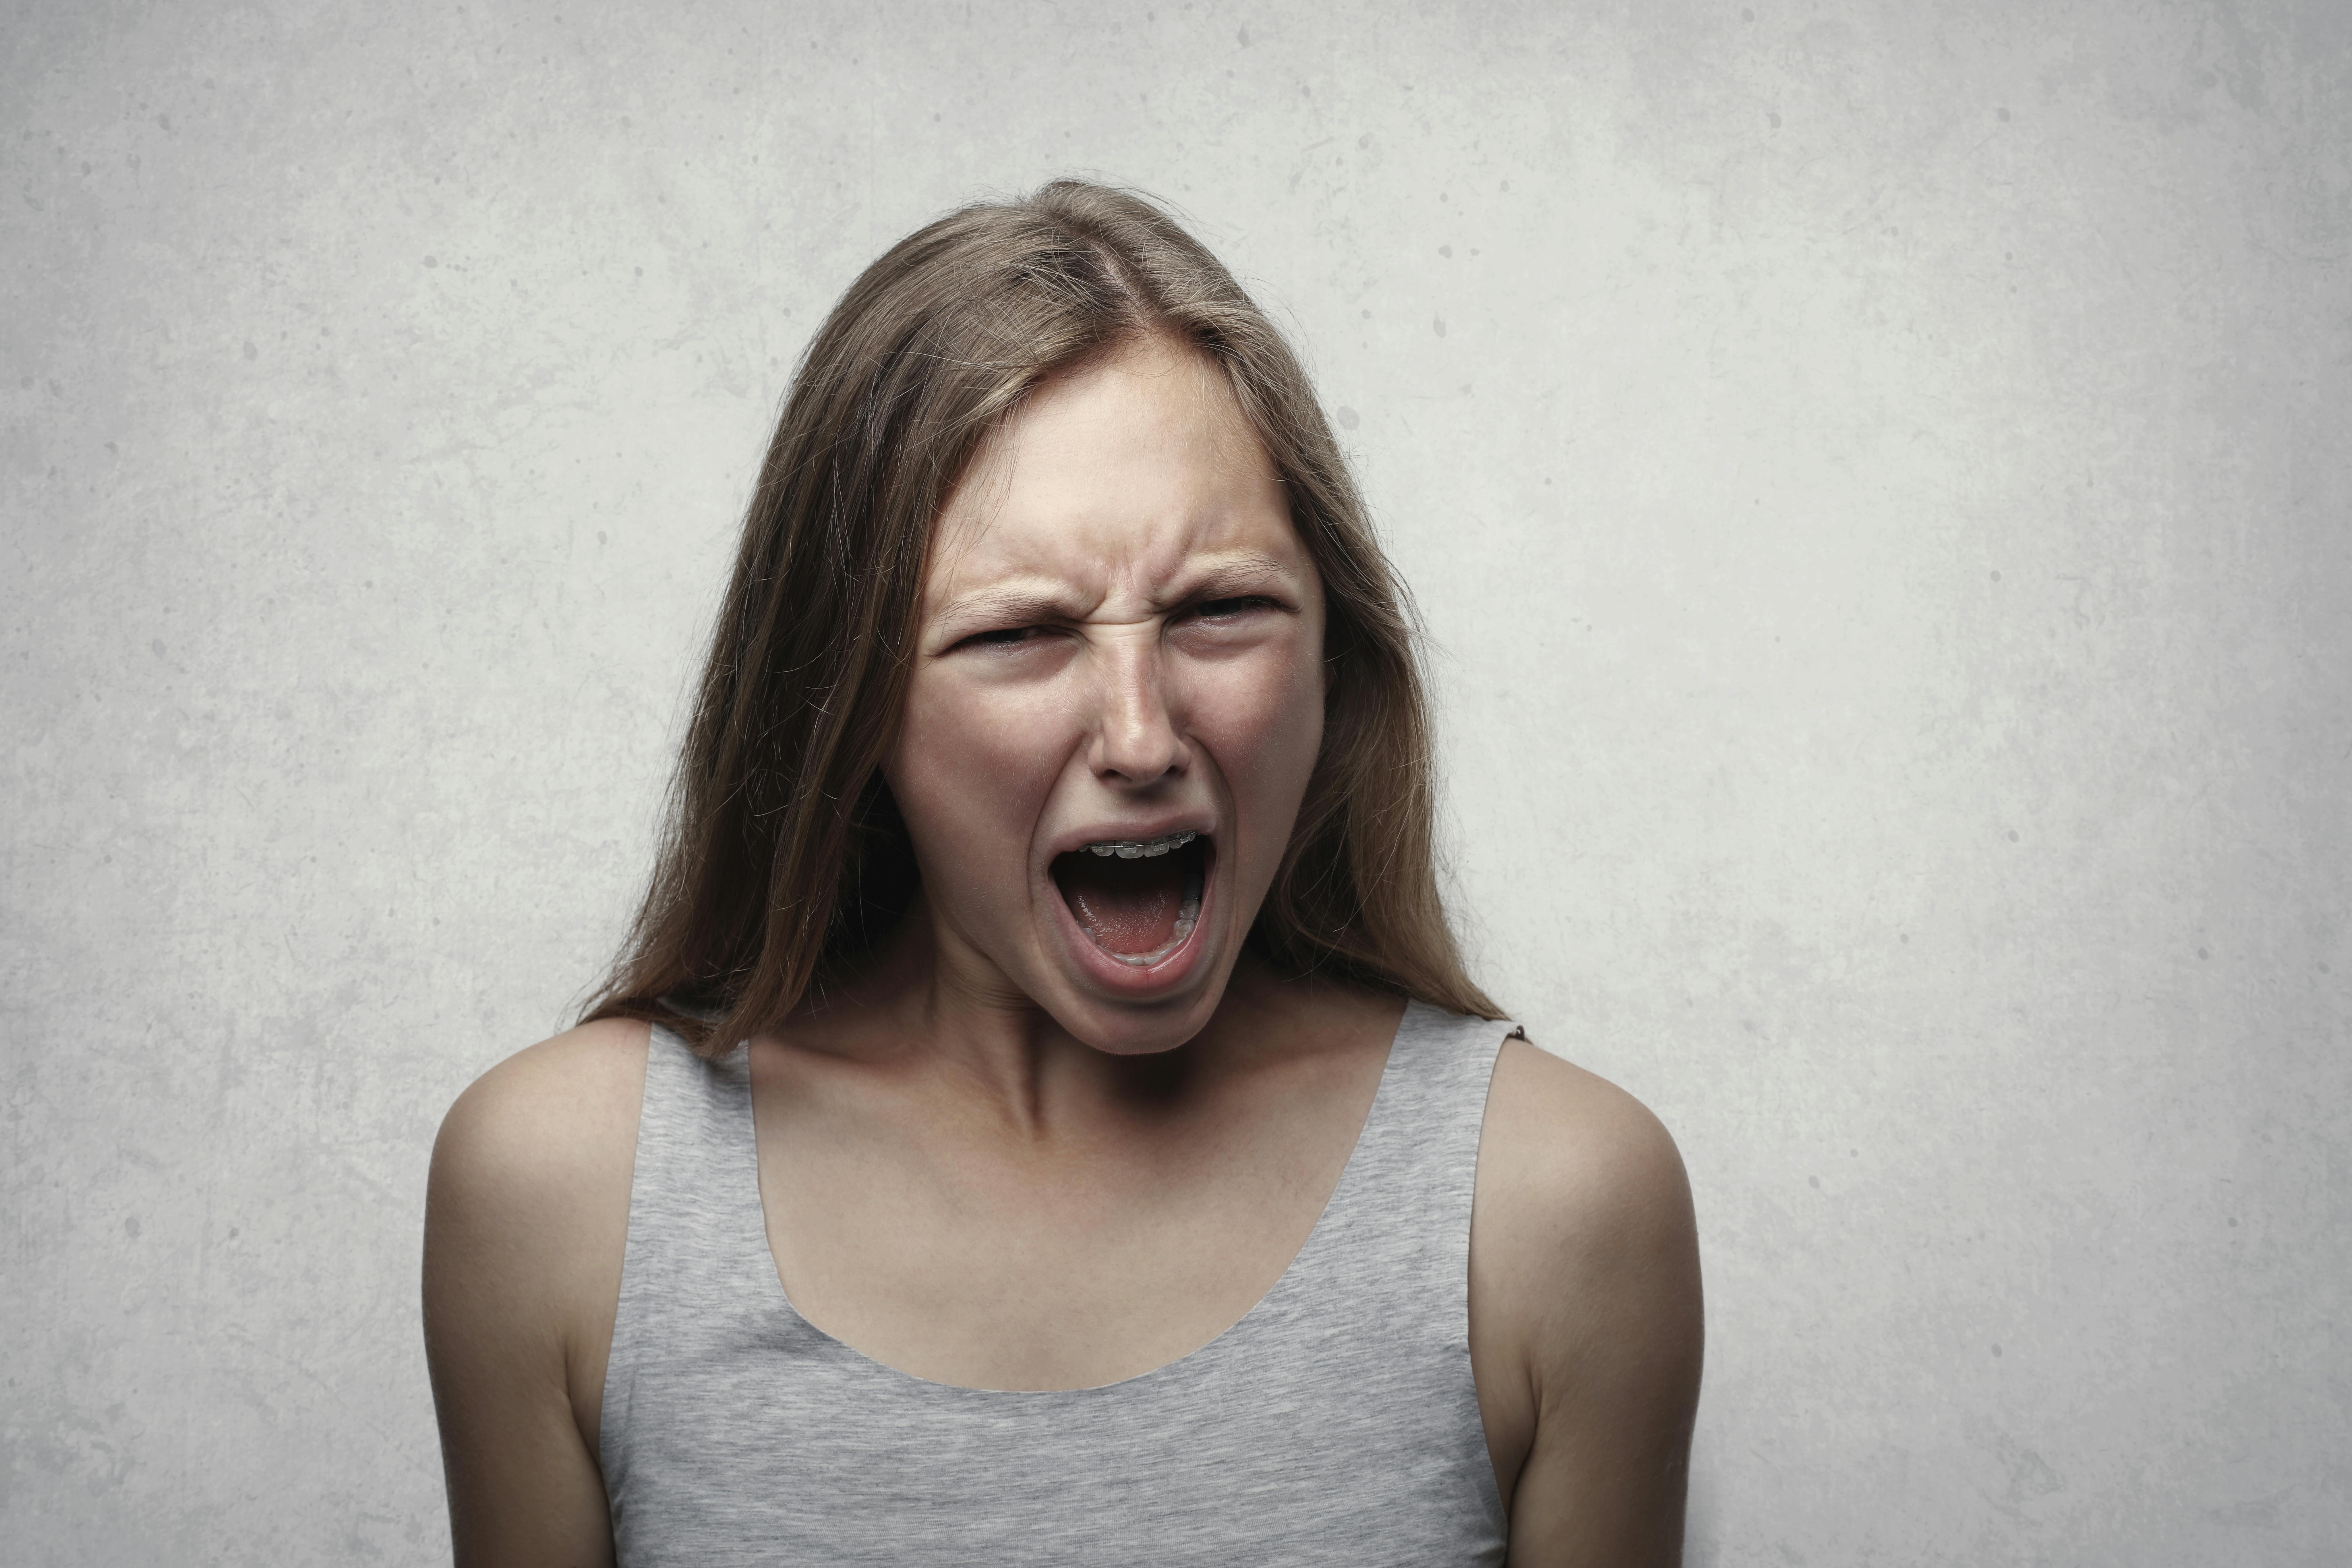 Angry woman | Source: Pexels